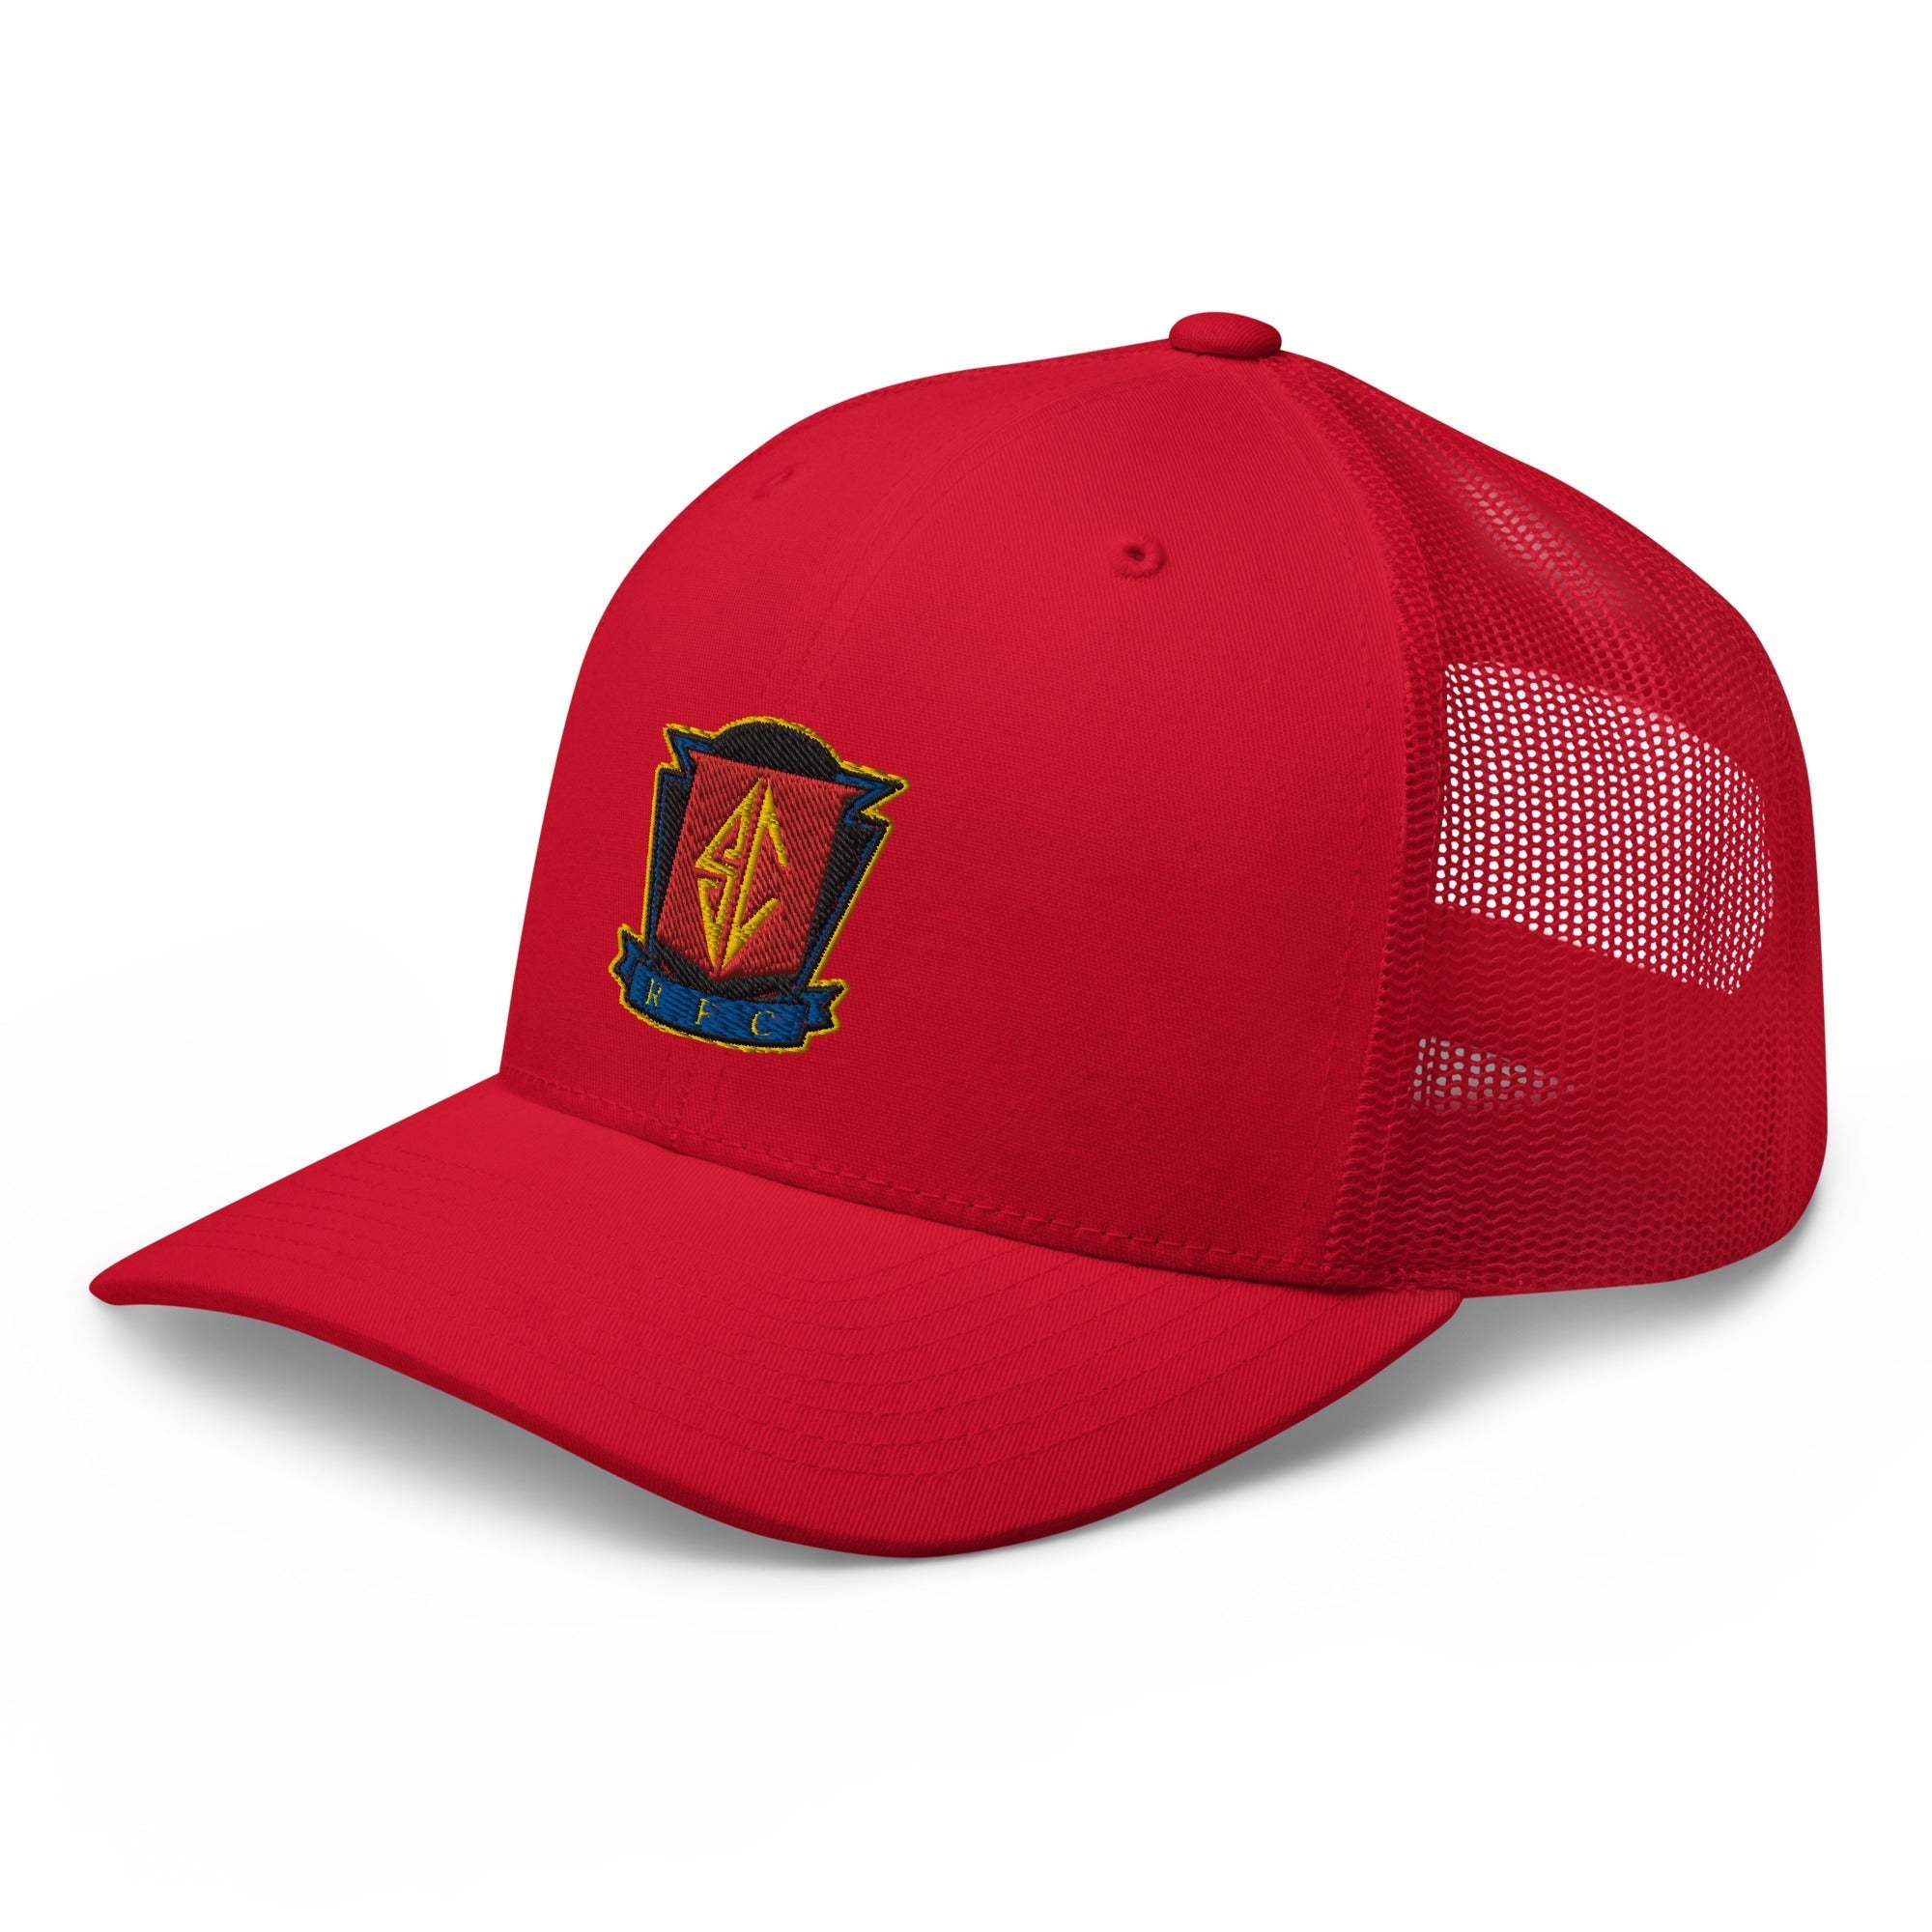 Rugby Imports Smith College RFC Trucker Cap